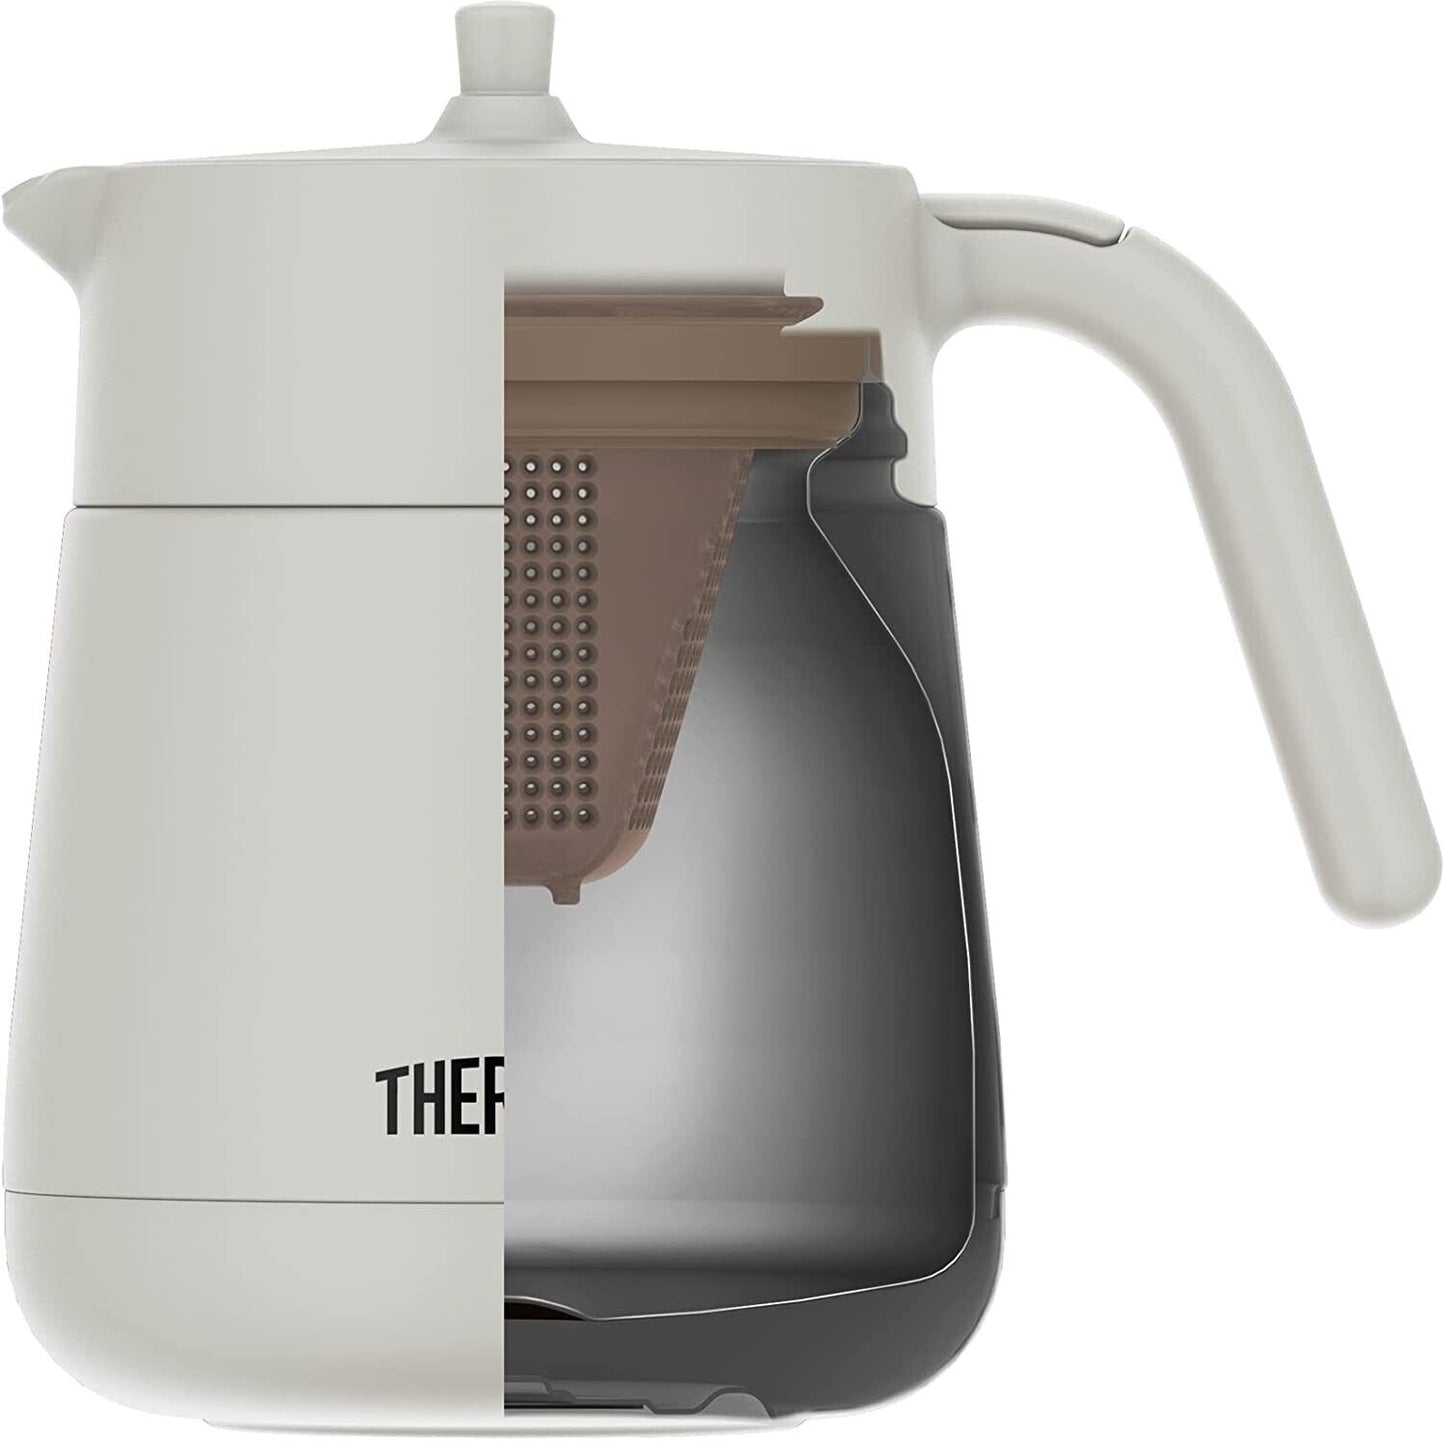 TTE-700 LGY Thermos vacuum insulation teapot with strainer 700ml light gray 100V